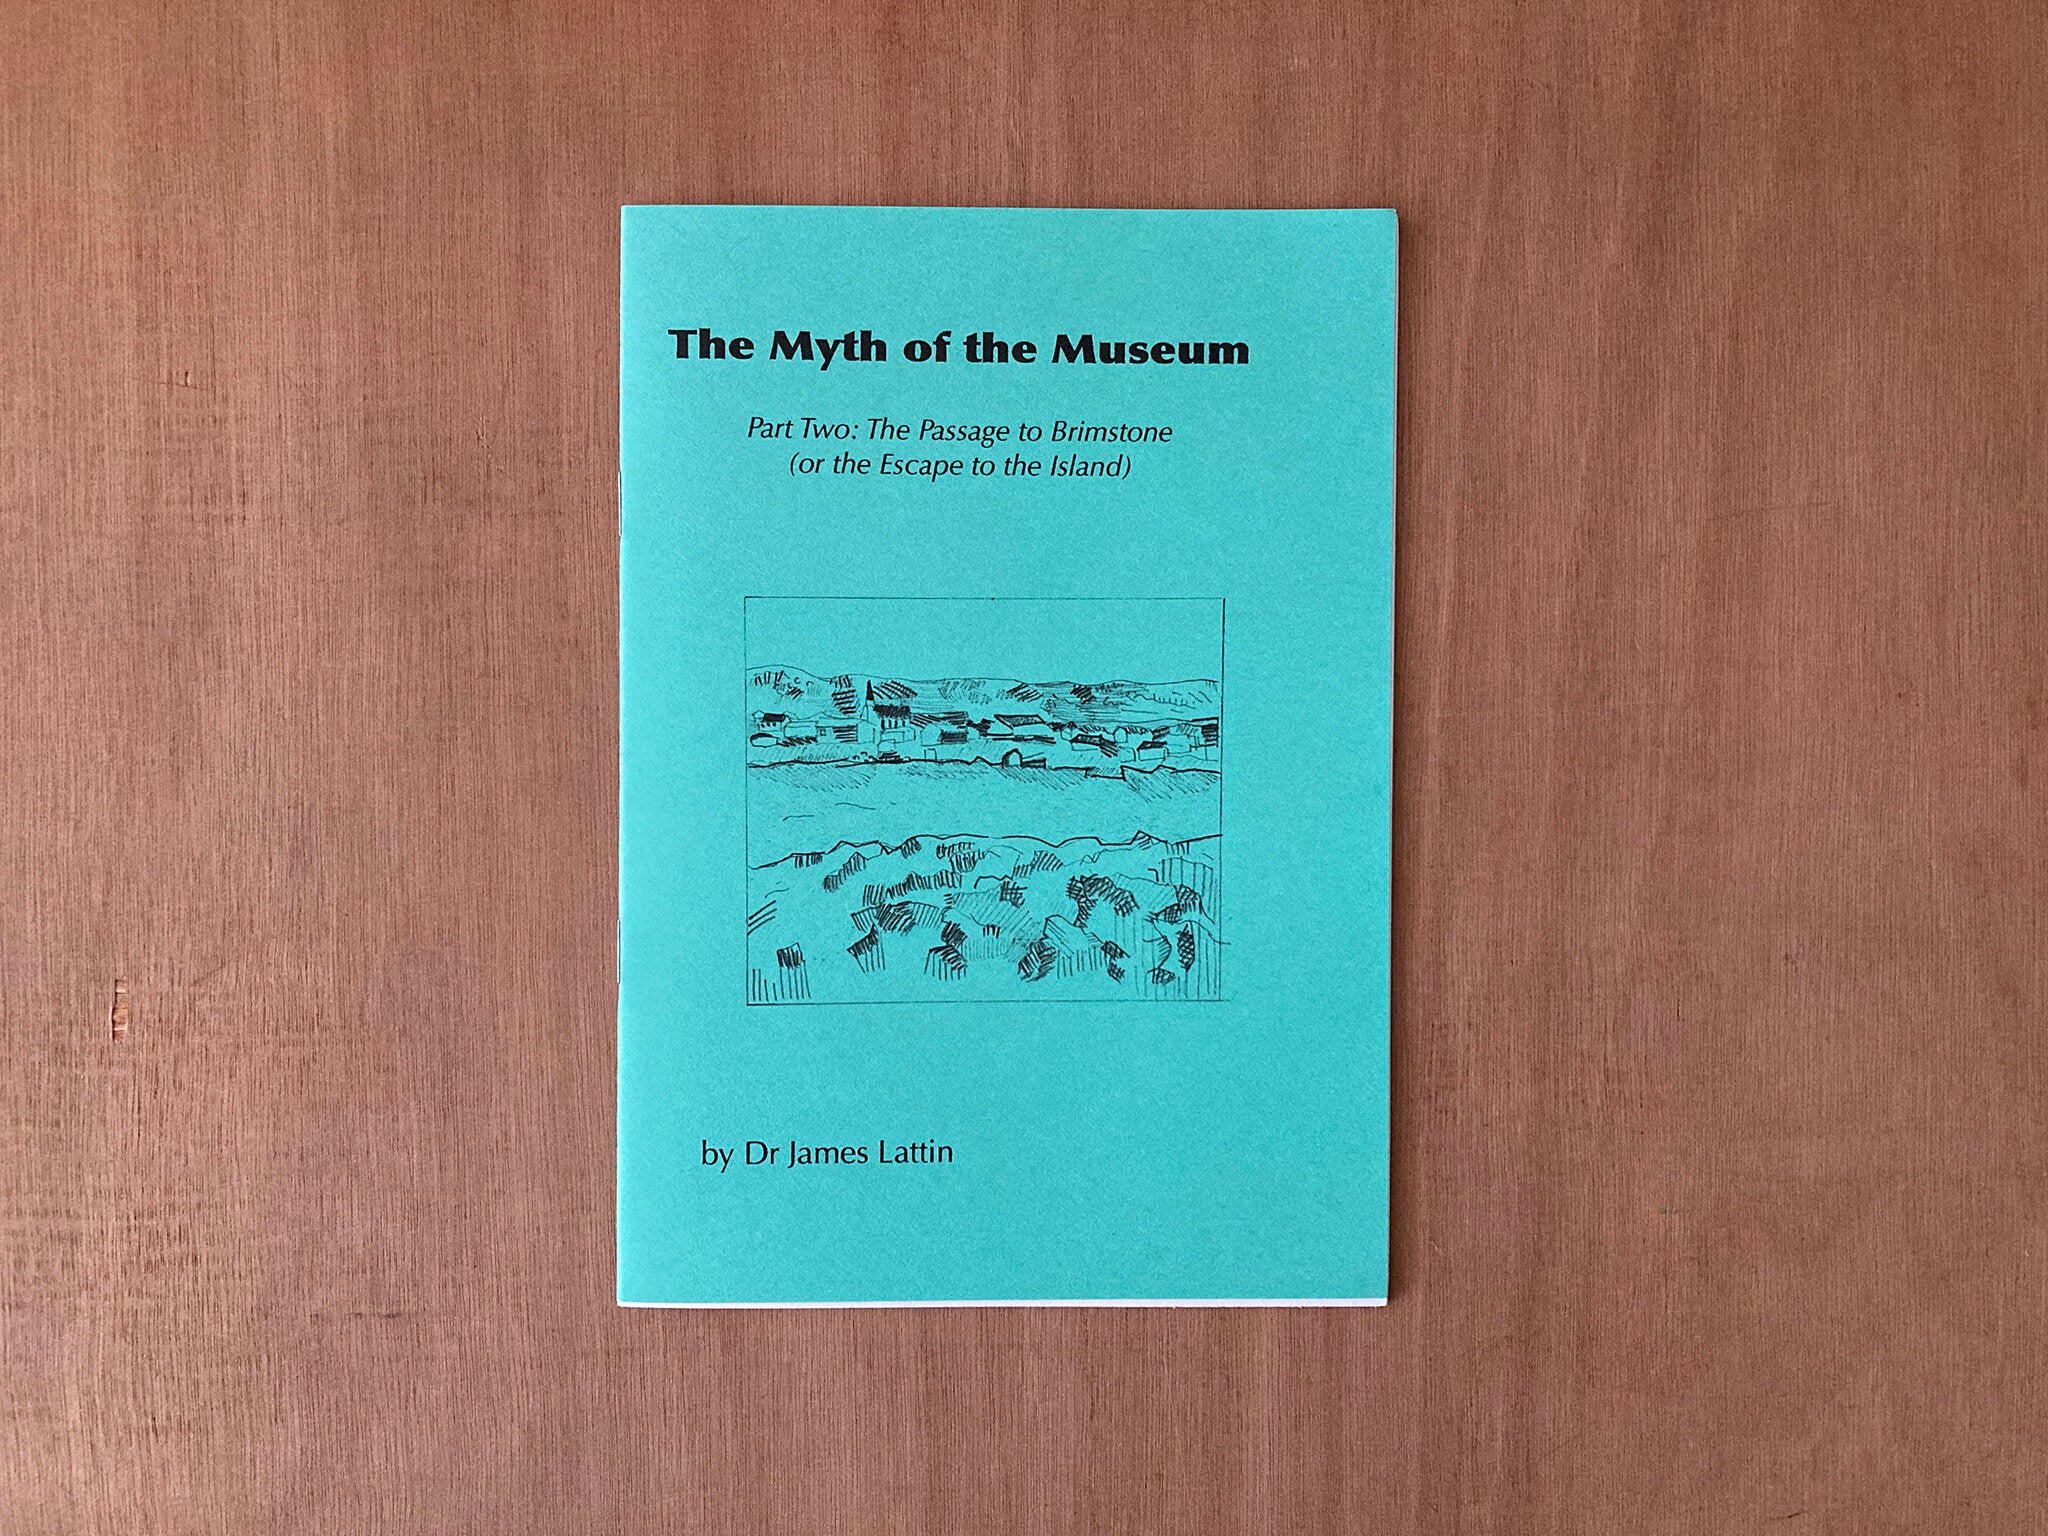 THE PASSAGE TO BRIMSTONE (MYTH OF THE MUSEUM PART TWO) by Dr James Lattin